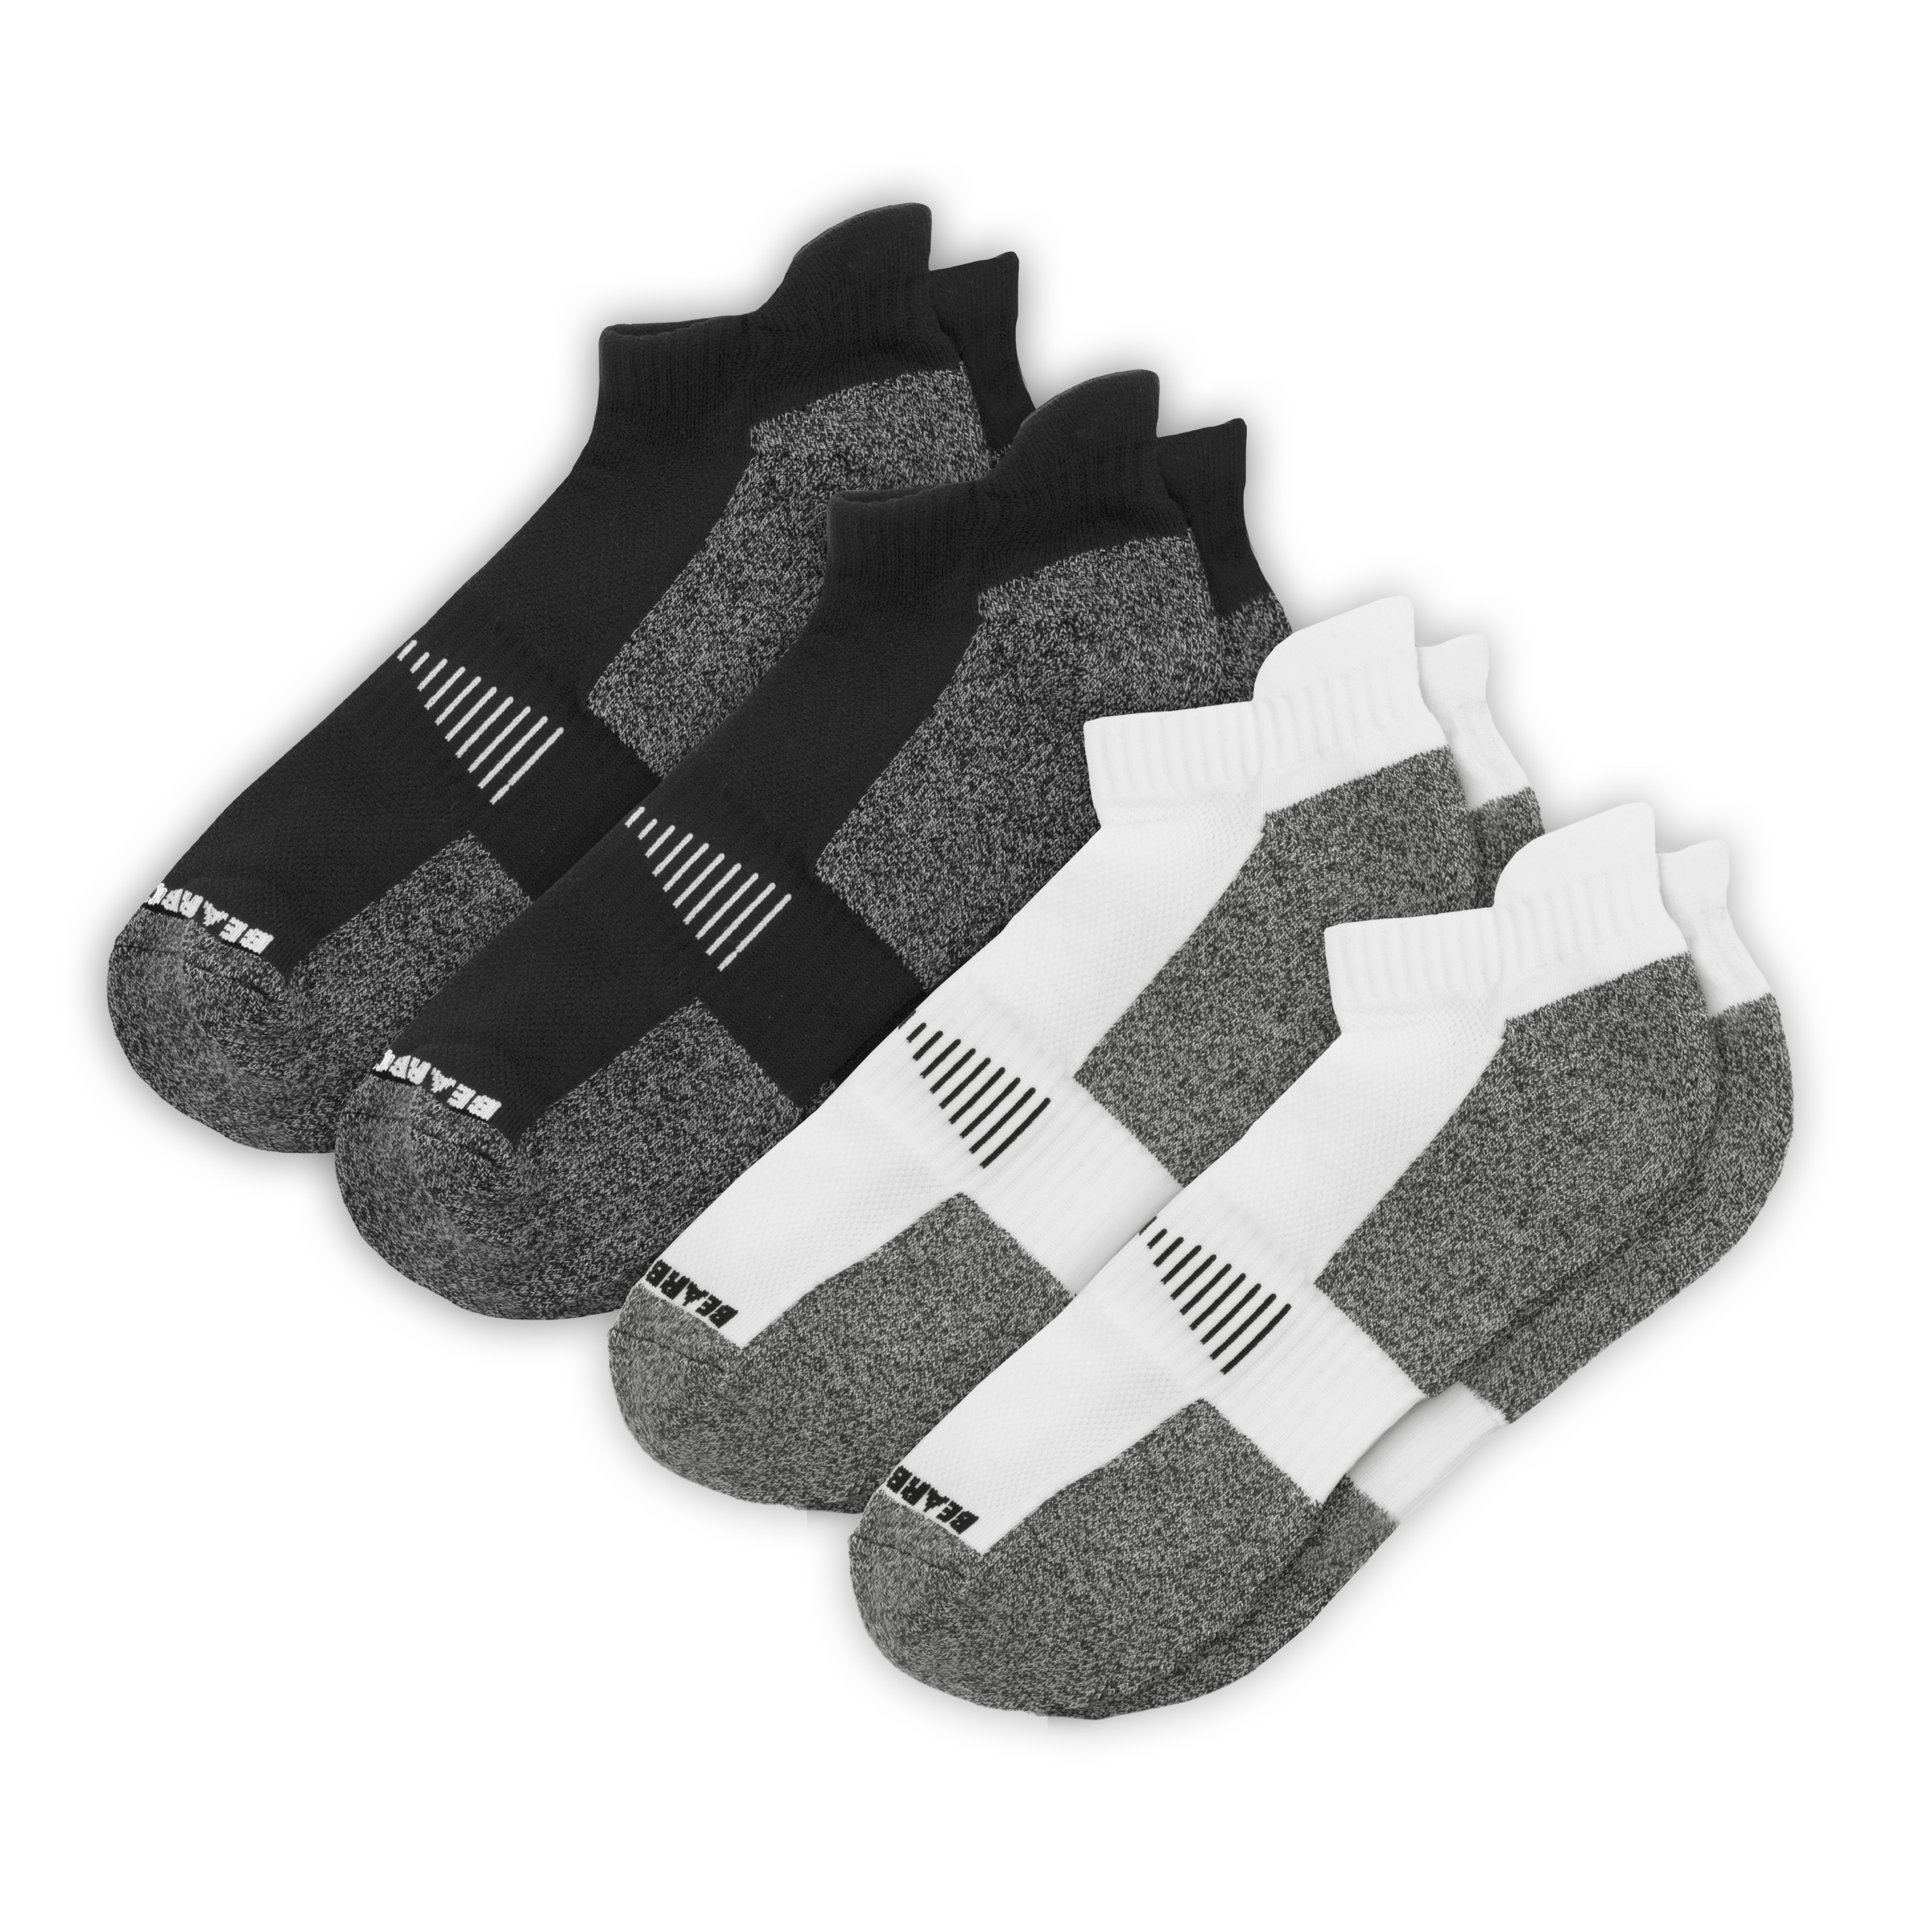 2 Pairs of Performance Ankle Socks White and 2 Pairs of Performance Ankle Socks Black with arch support and grey padding in heel